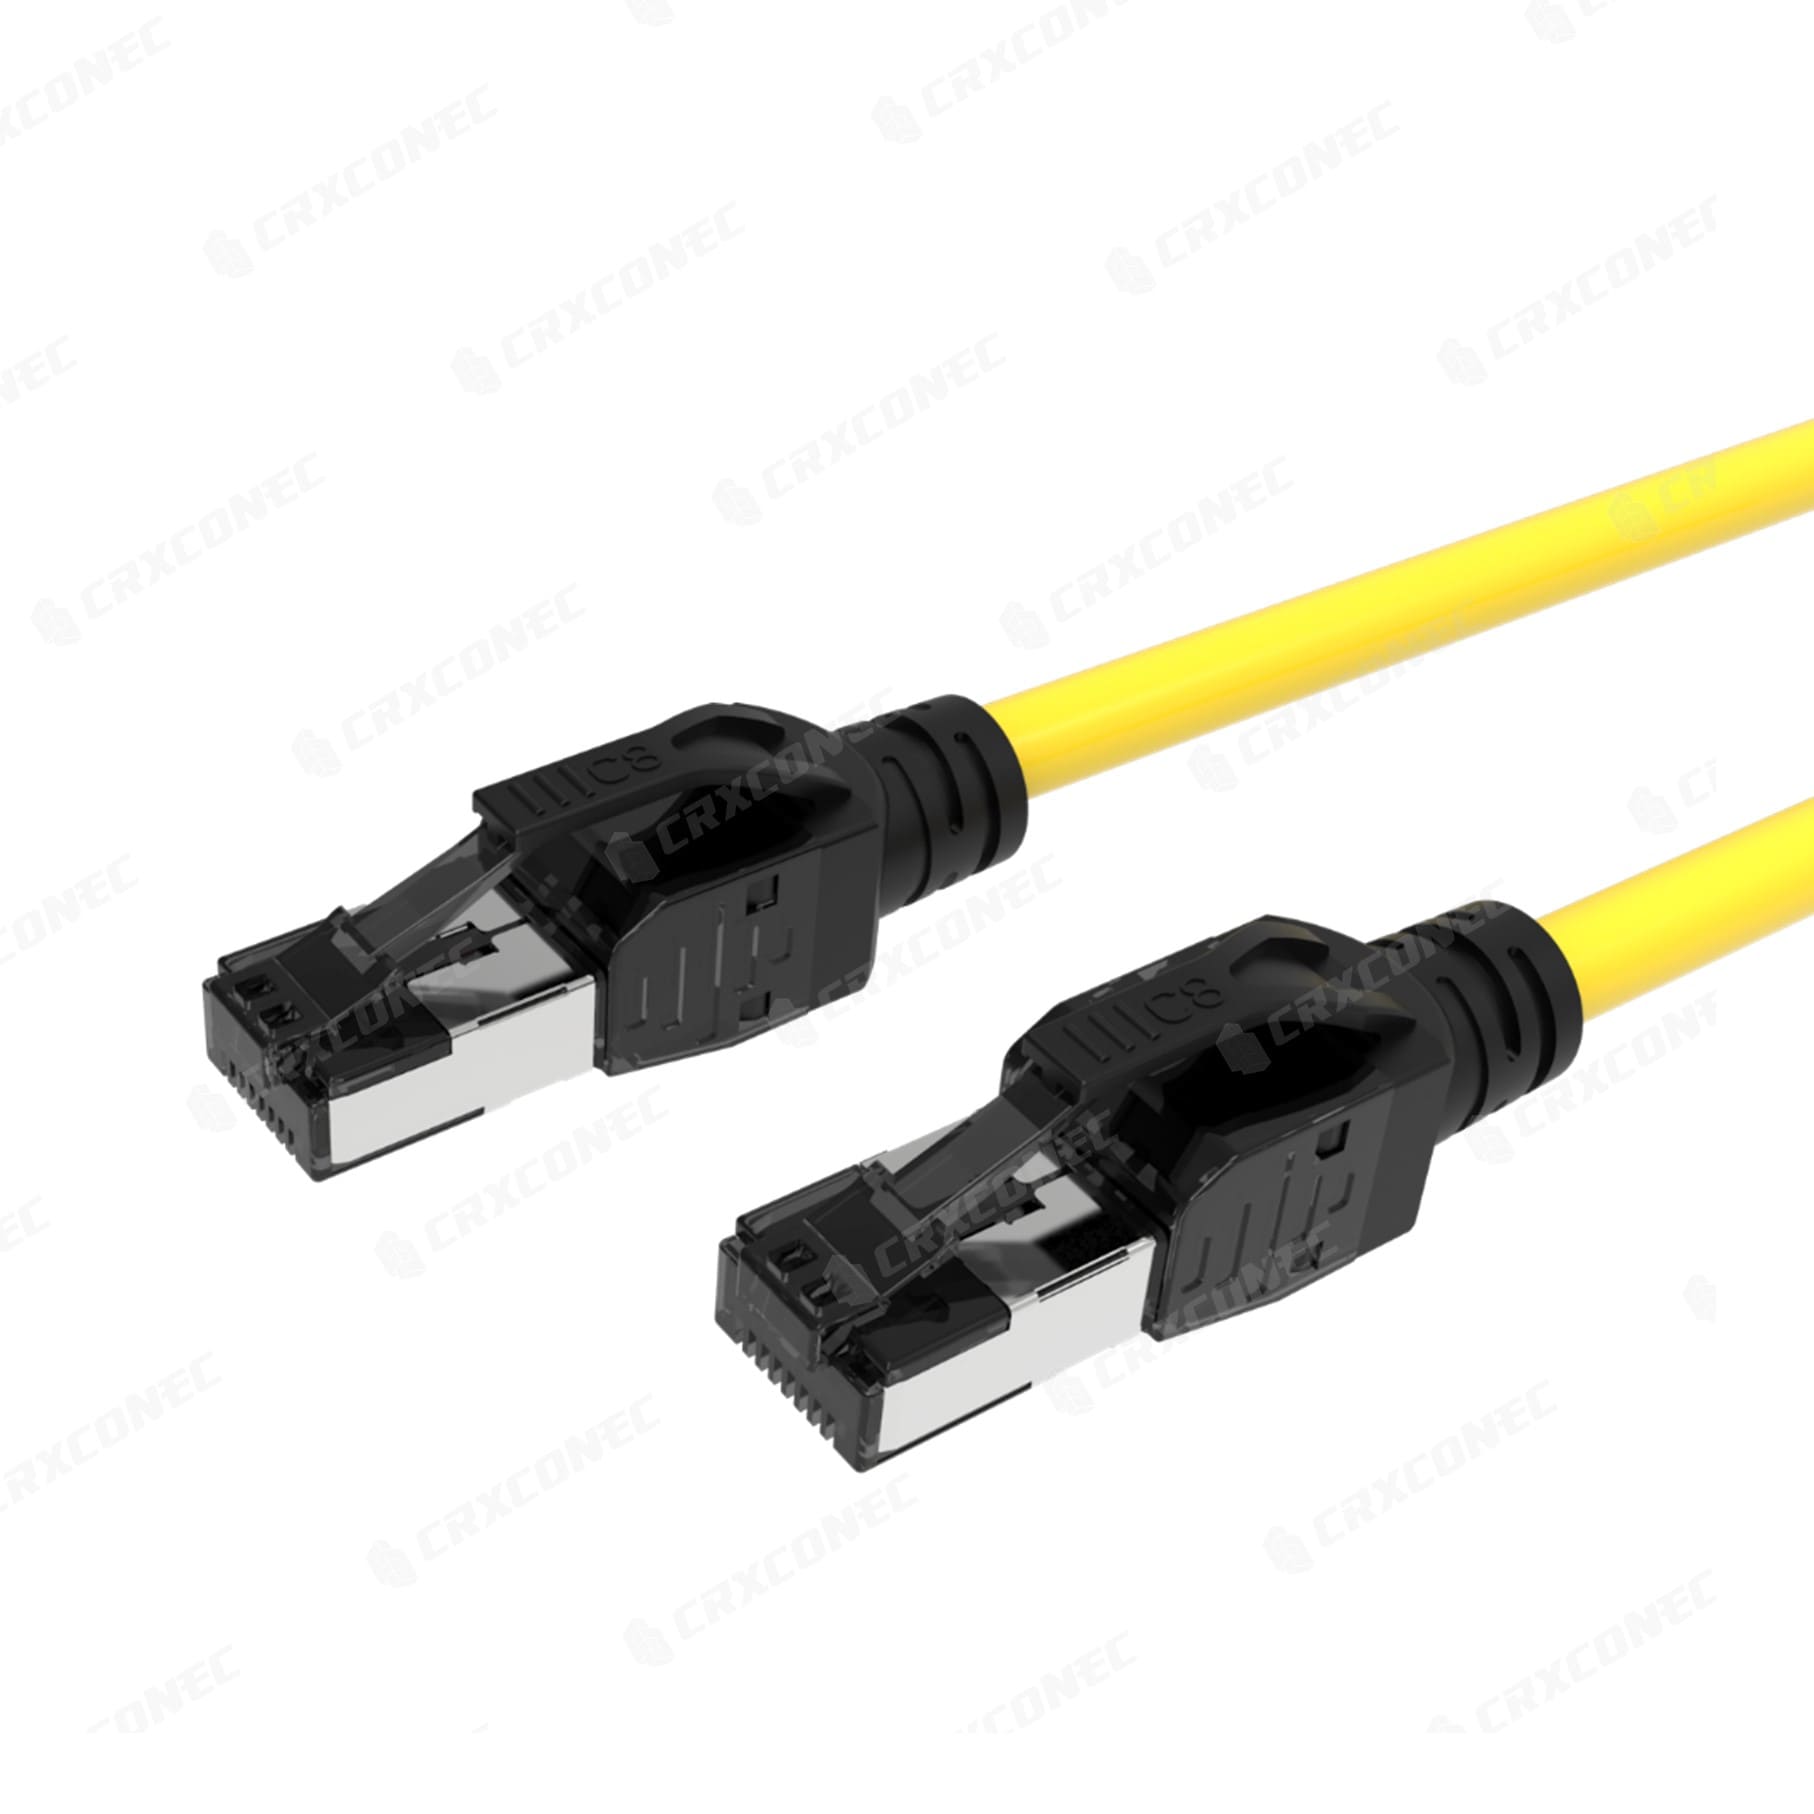 Cat8 Structured Cabling  Top-Quality Structured Cabling & Fiber Solutions  by CRXCONEC